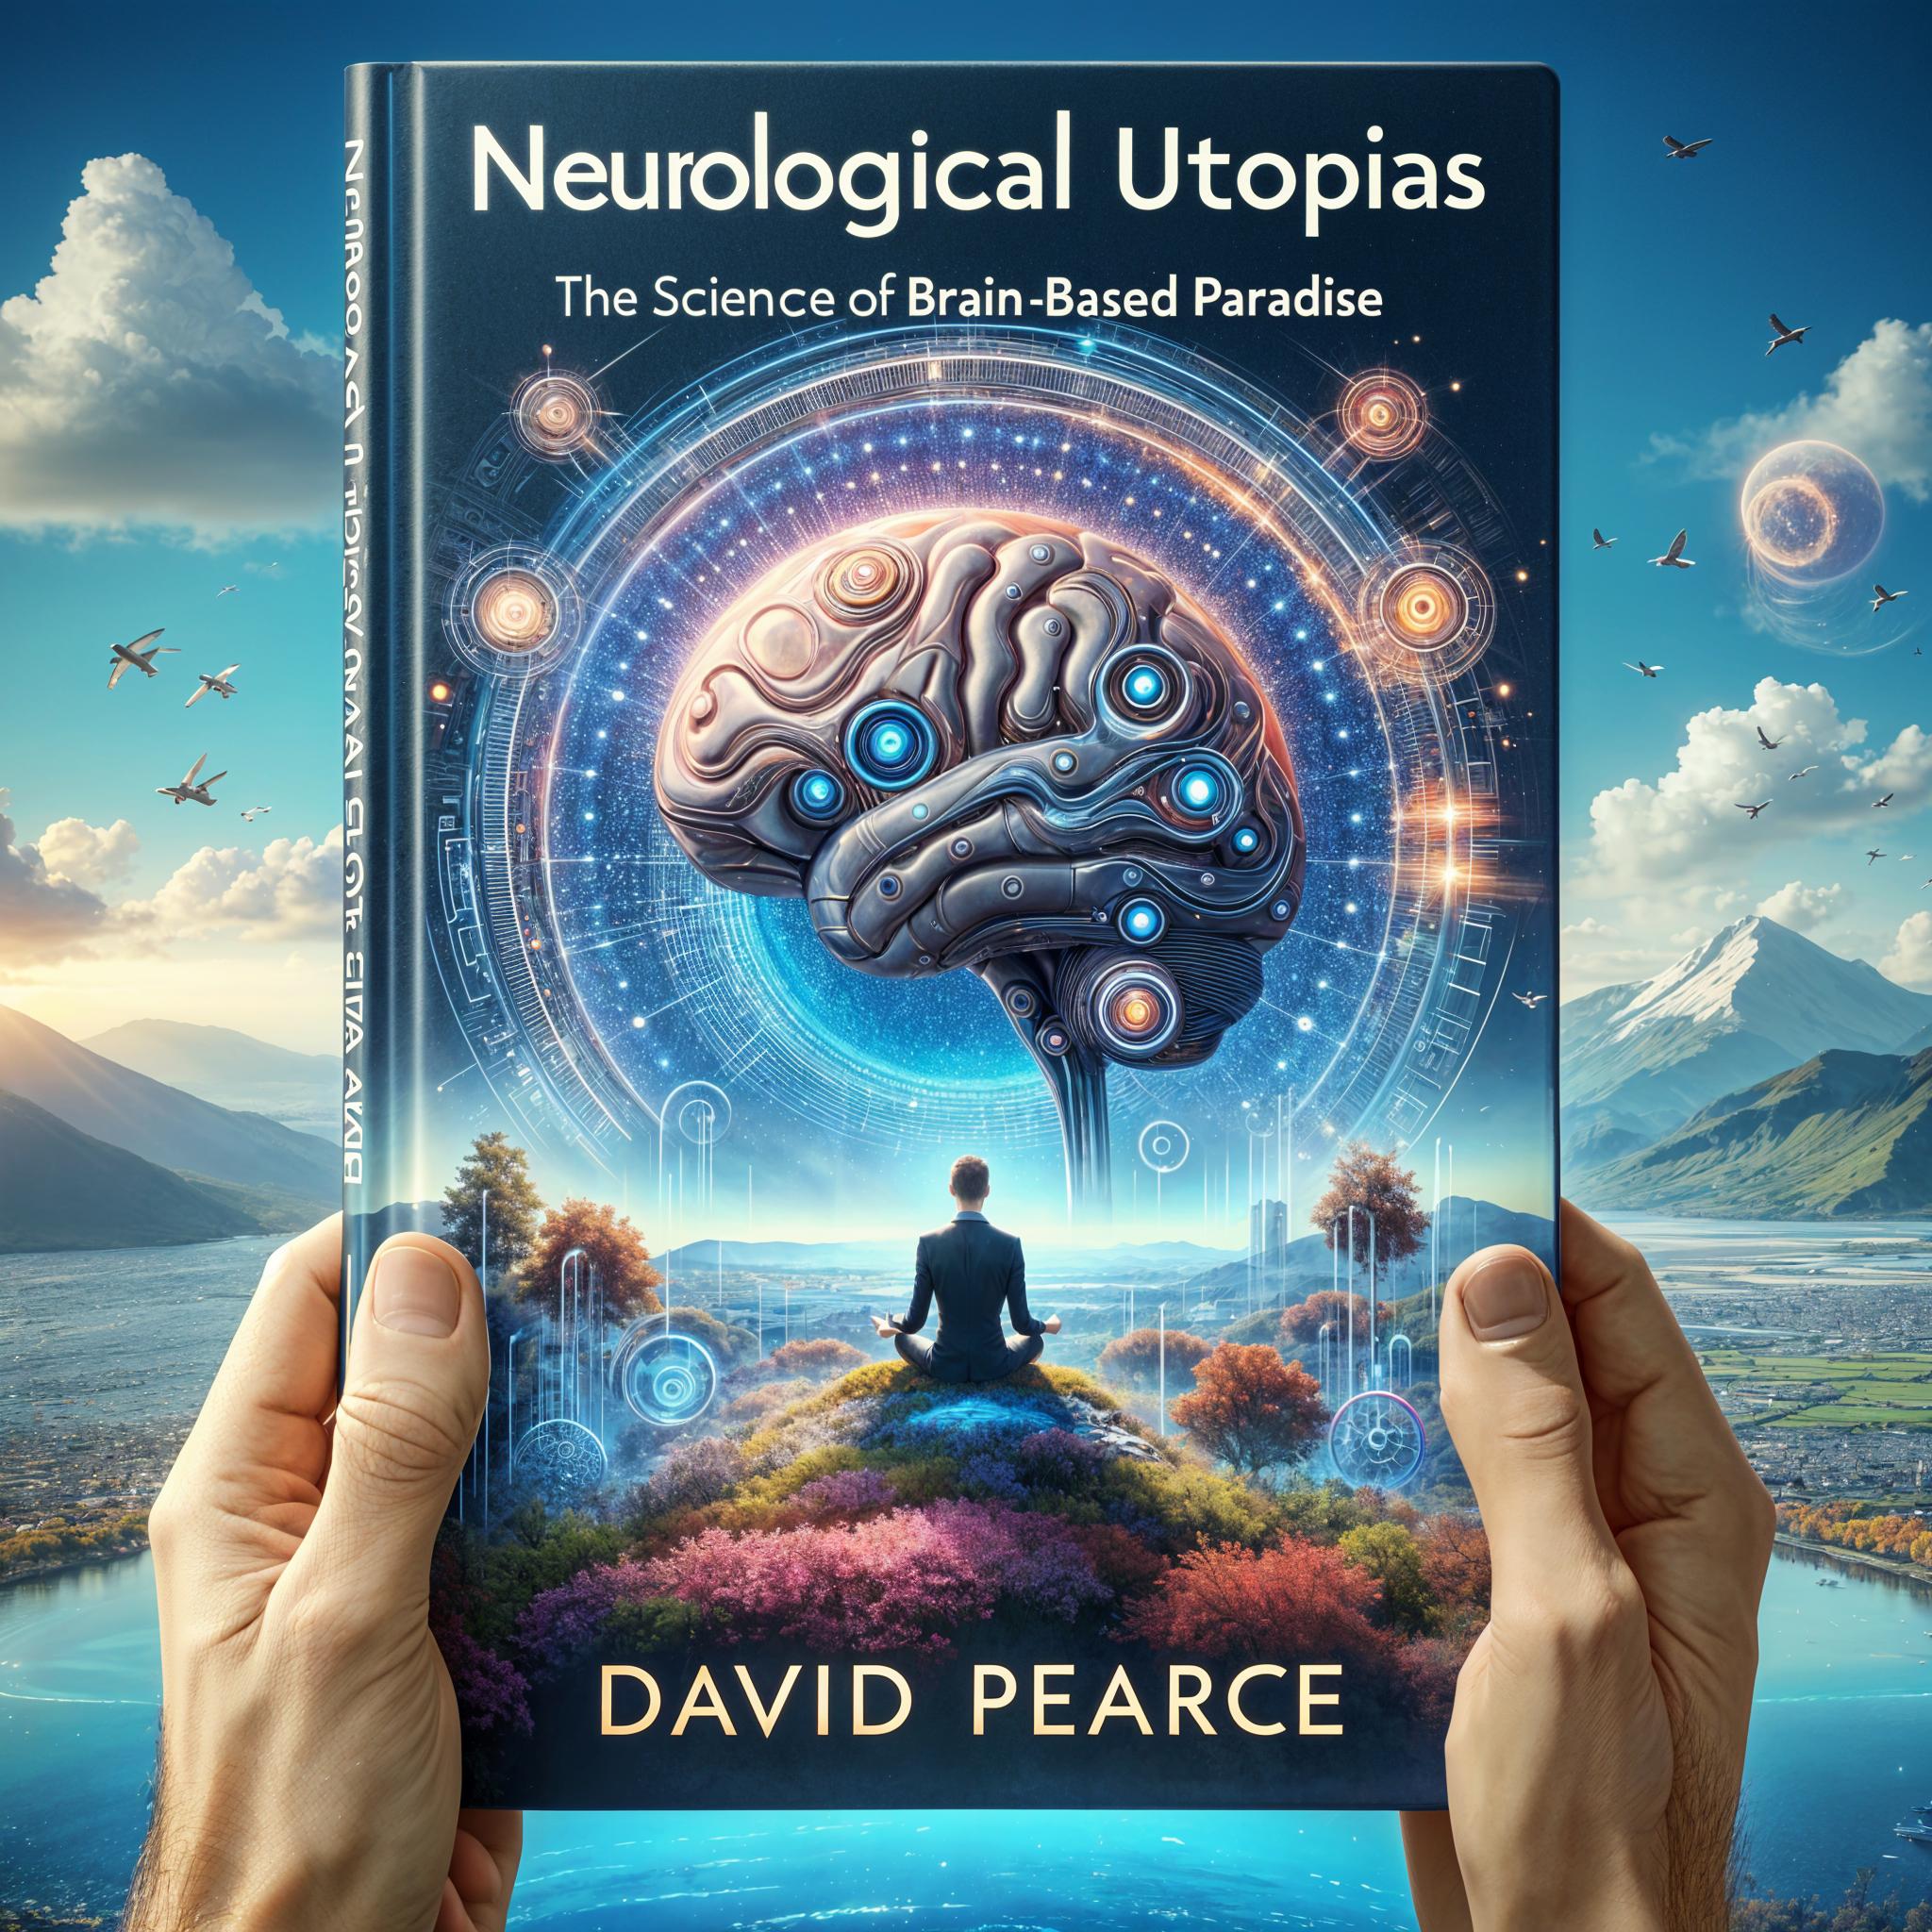 Neurological Utopias: The Science of Brain-Based Paradise by David Pearce